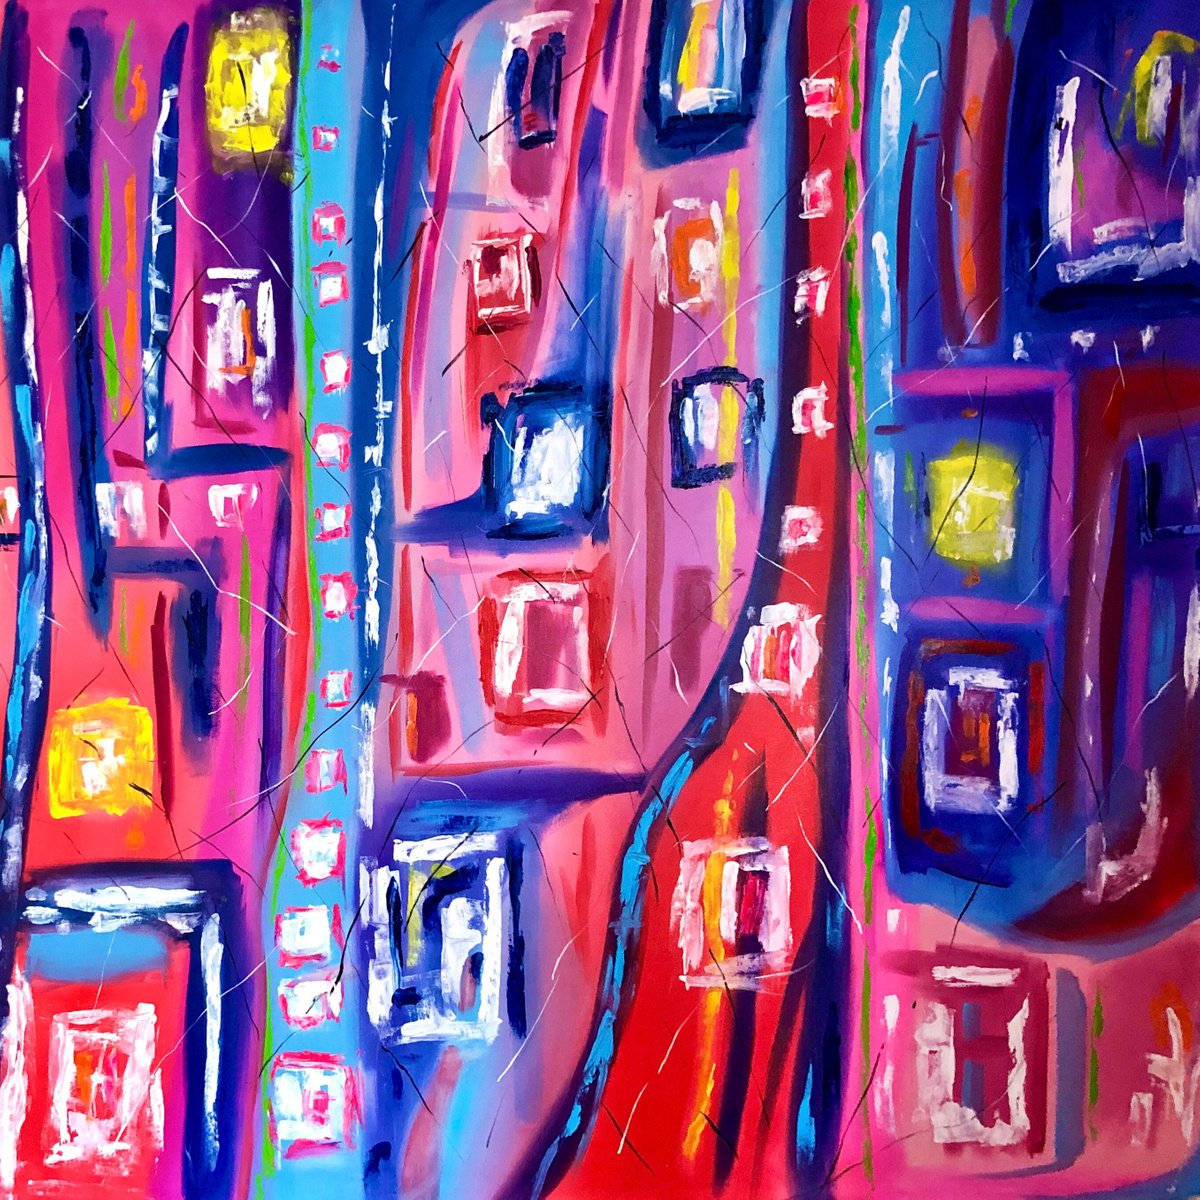 Only love can triumph - XXXL large modern abstract oil on canvas by Nataliia Krykun